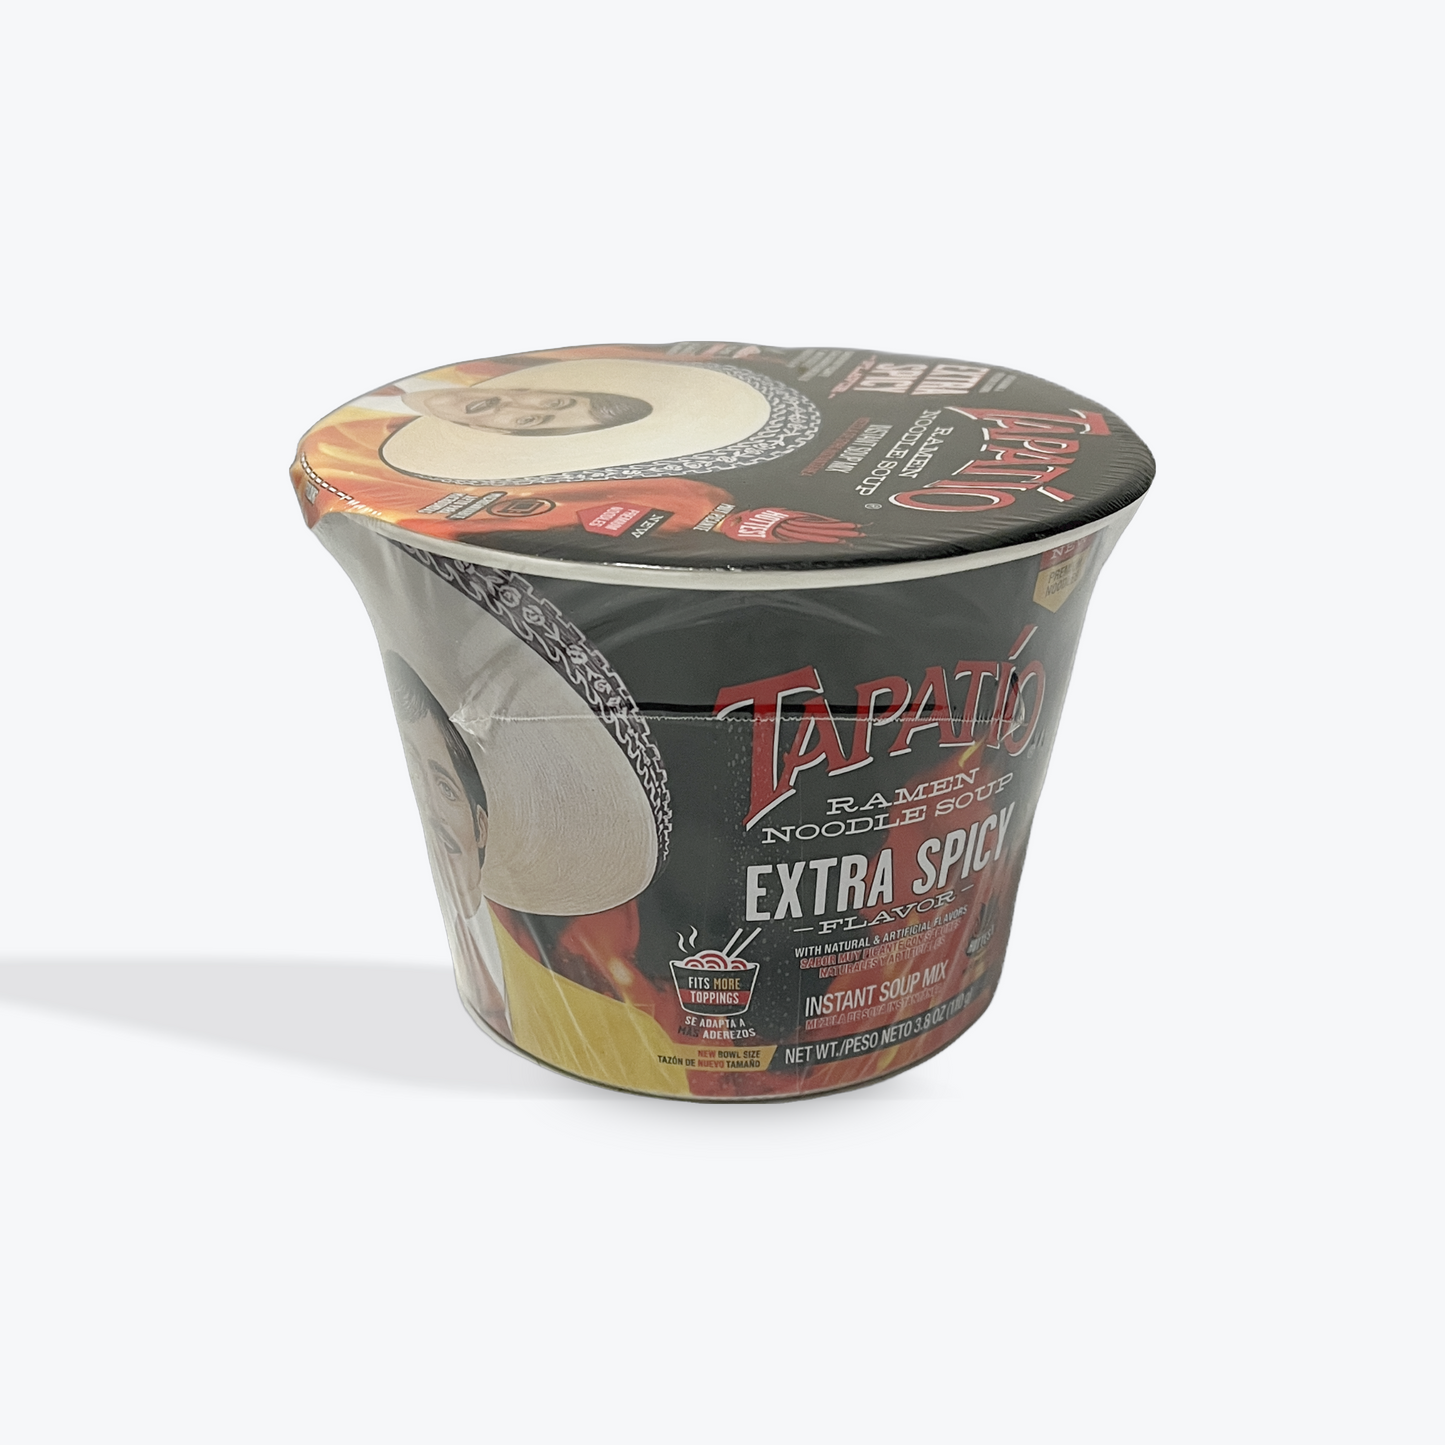 Tapatio-extra spicy ramen noodle soup